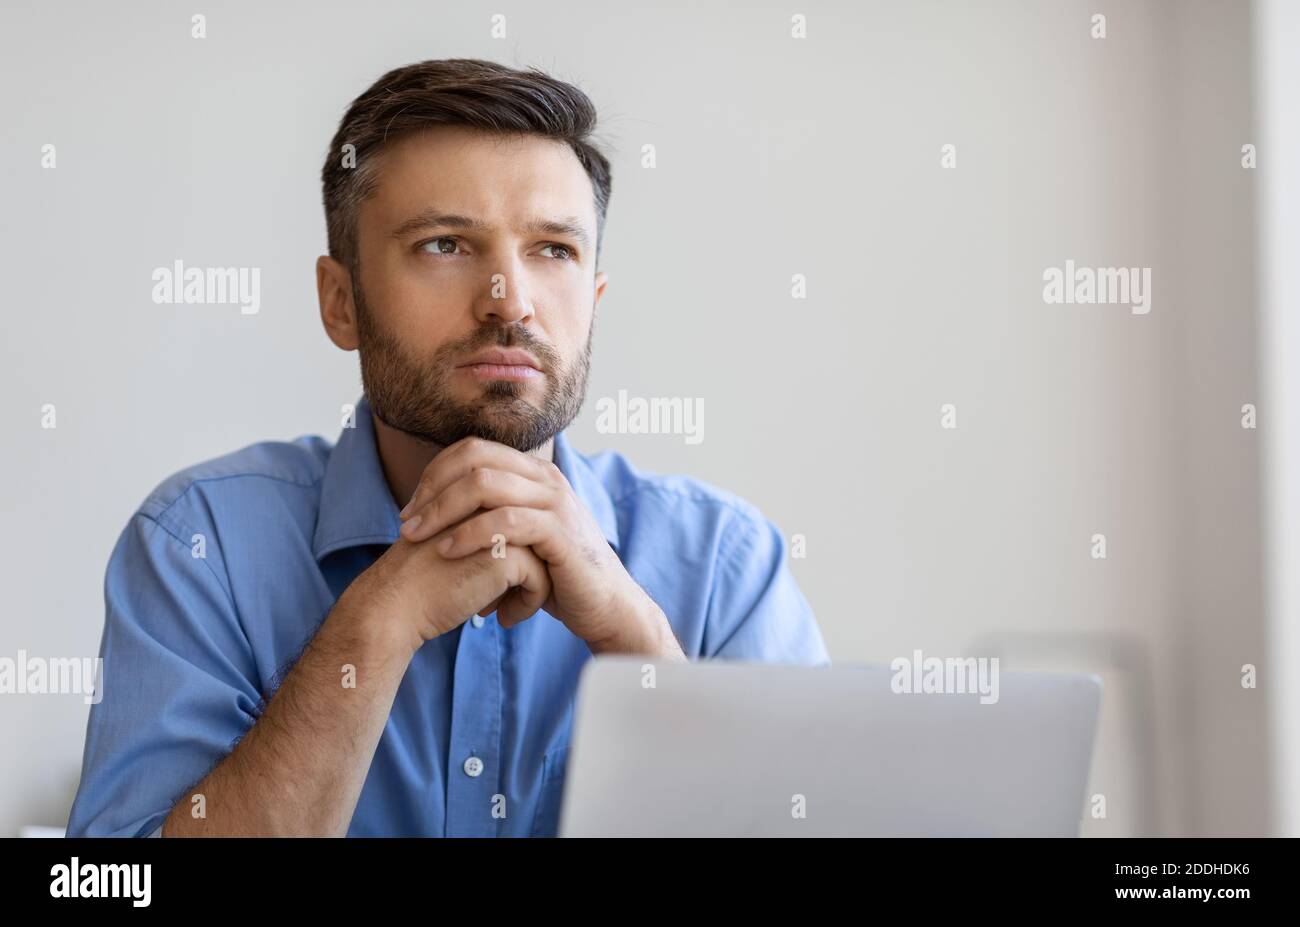 Portrait Of Pensive Businessman Sitting At Workplace With Laptop And Looking Away Stock Photo